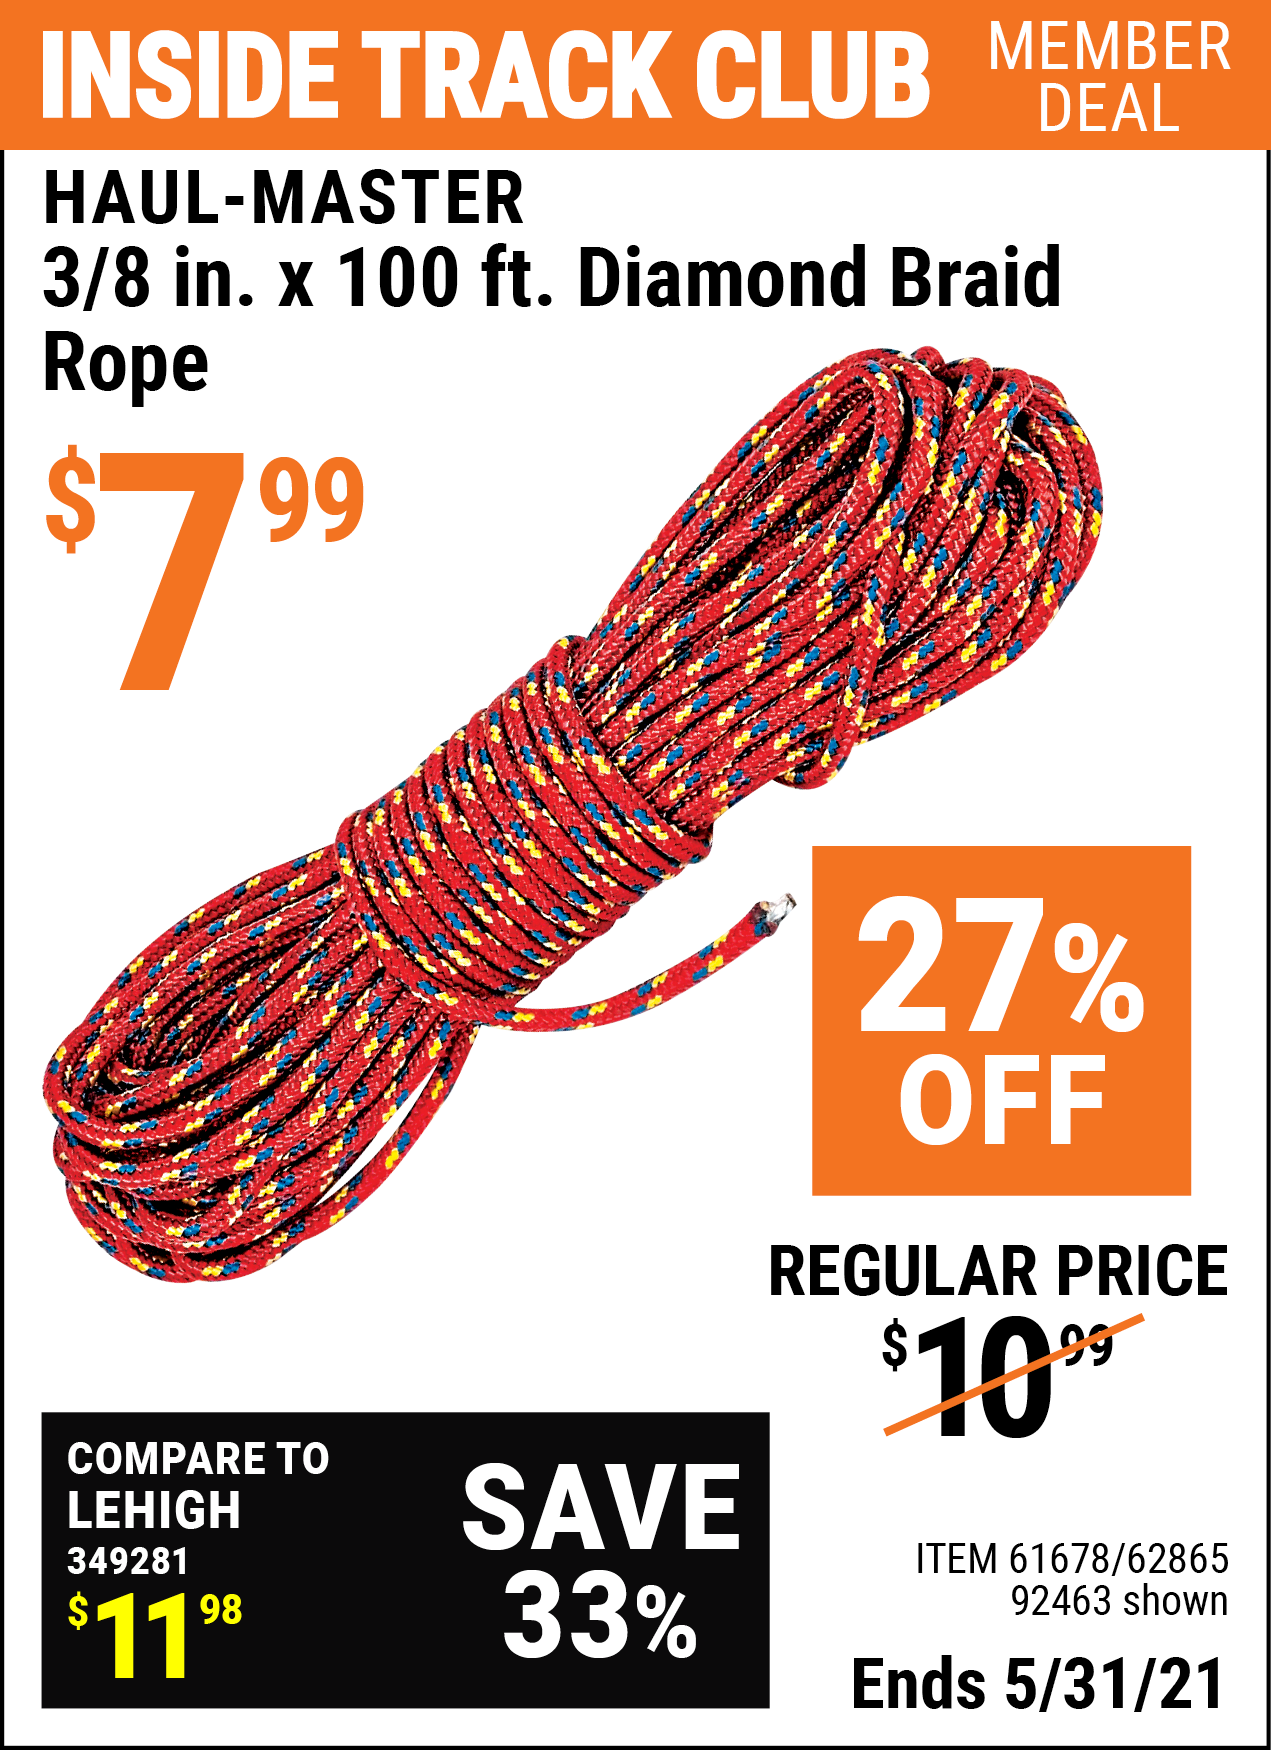 Inside Track Club members can buy the HAUL-MASTER 3/8 in. x 100 ft. Diamond Braid Rope (Item 61678/92463/62865) for $7.99, valid through 5/31/2021.